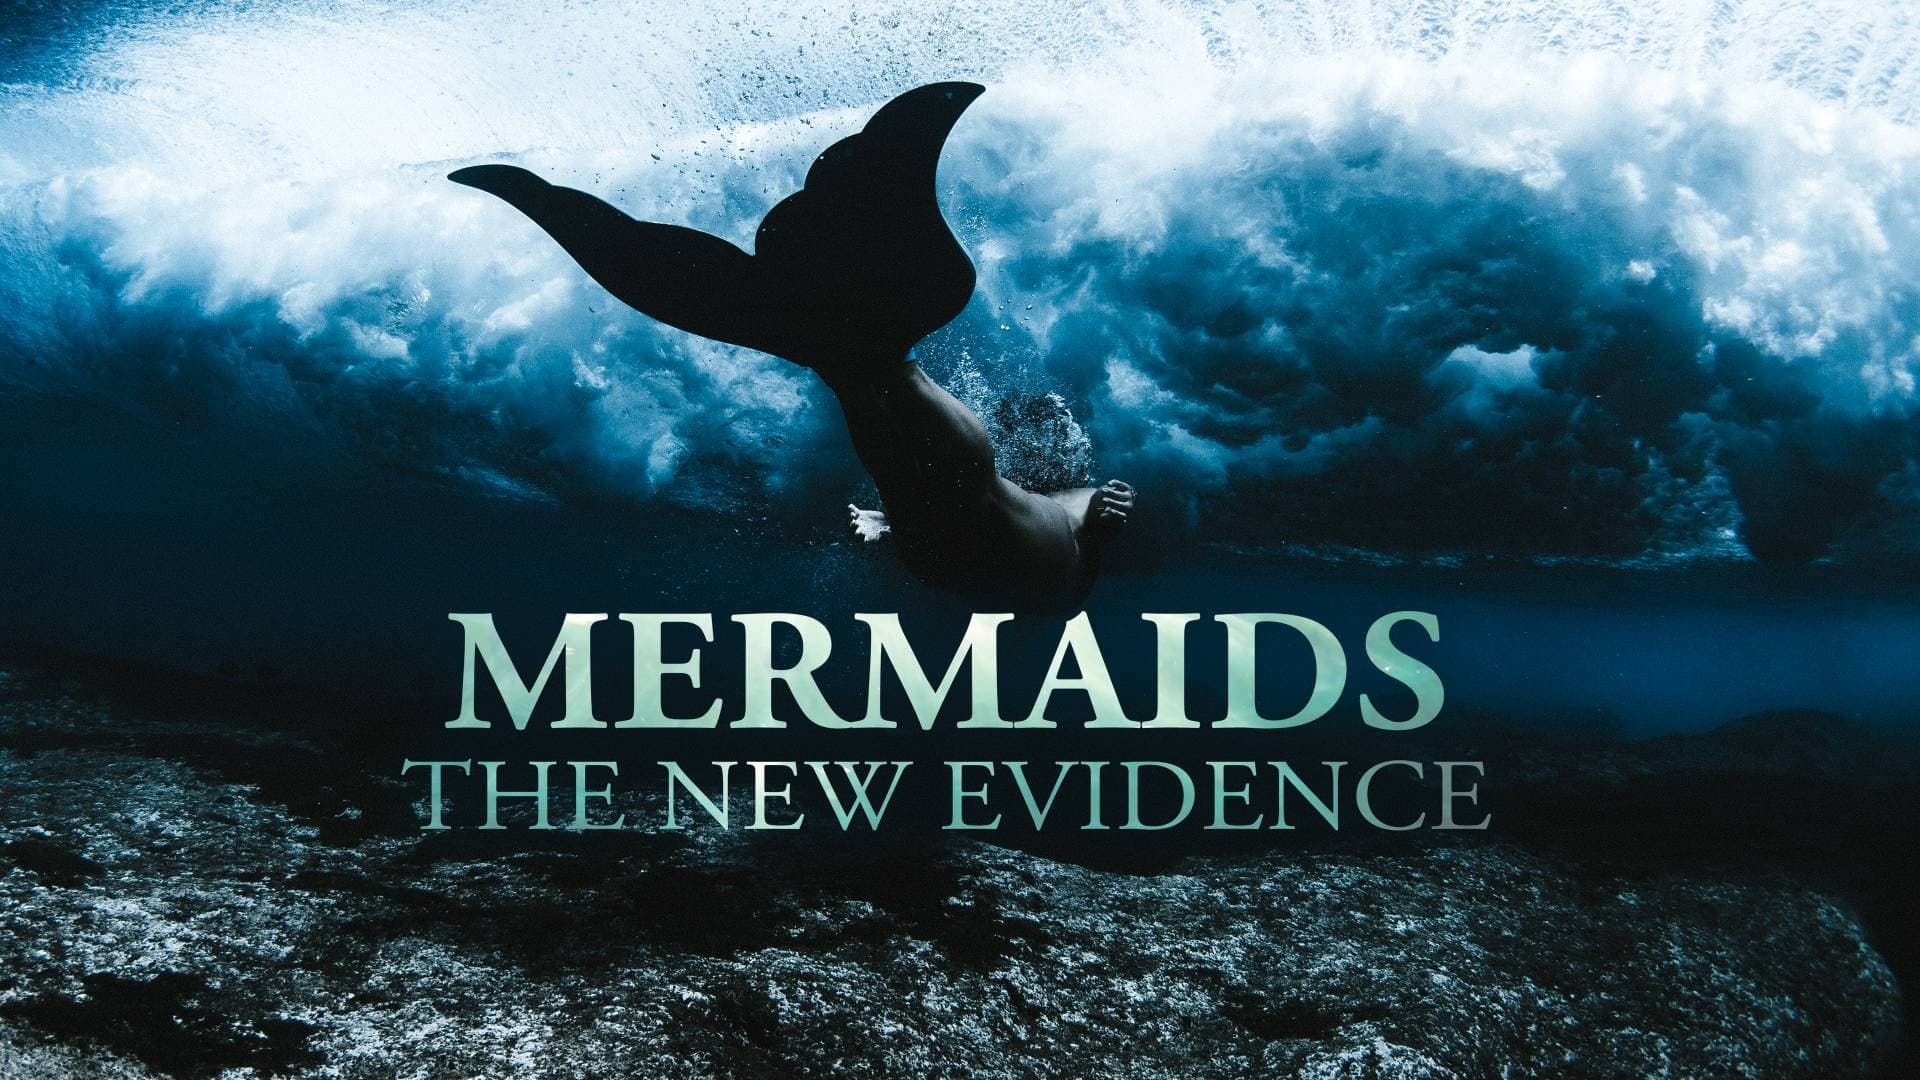 Mermaids: The New Evidence background